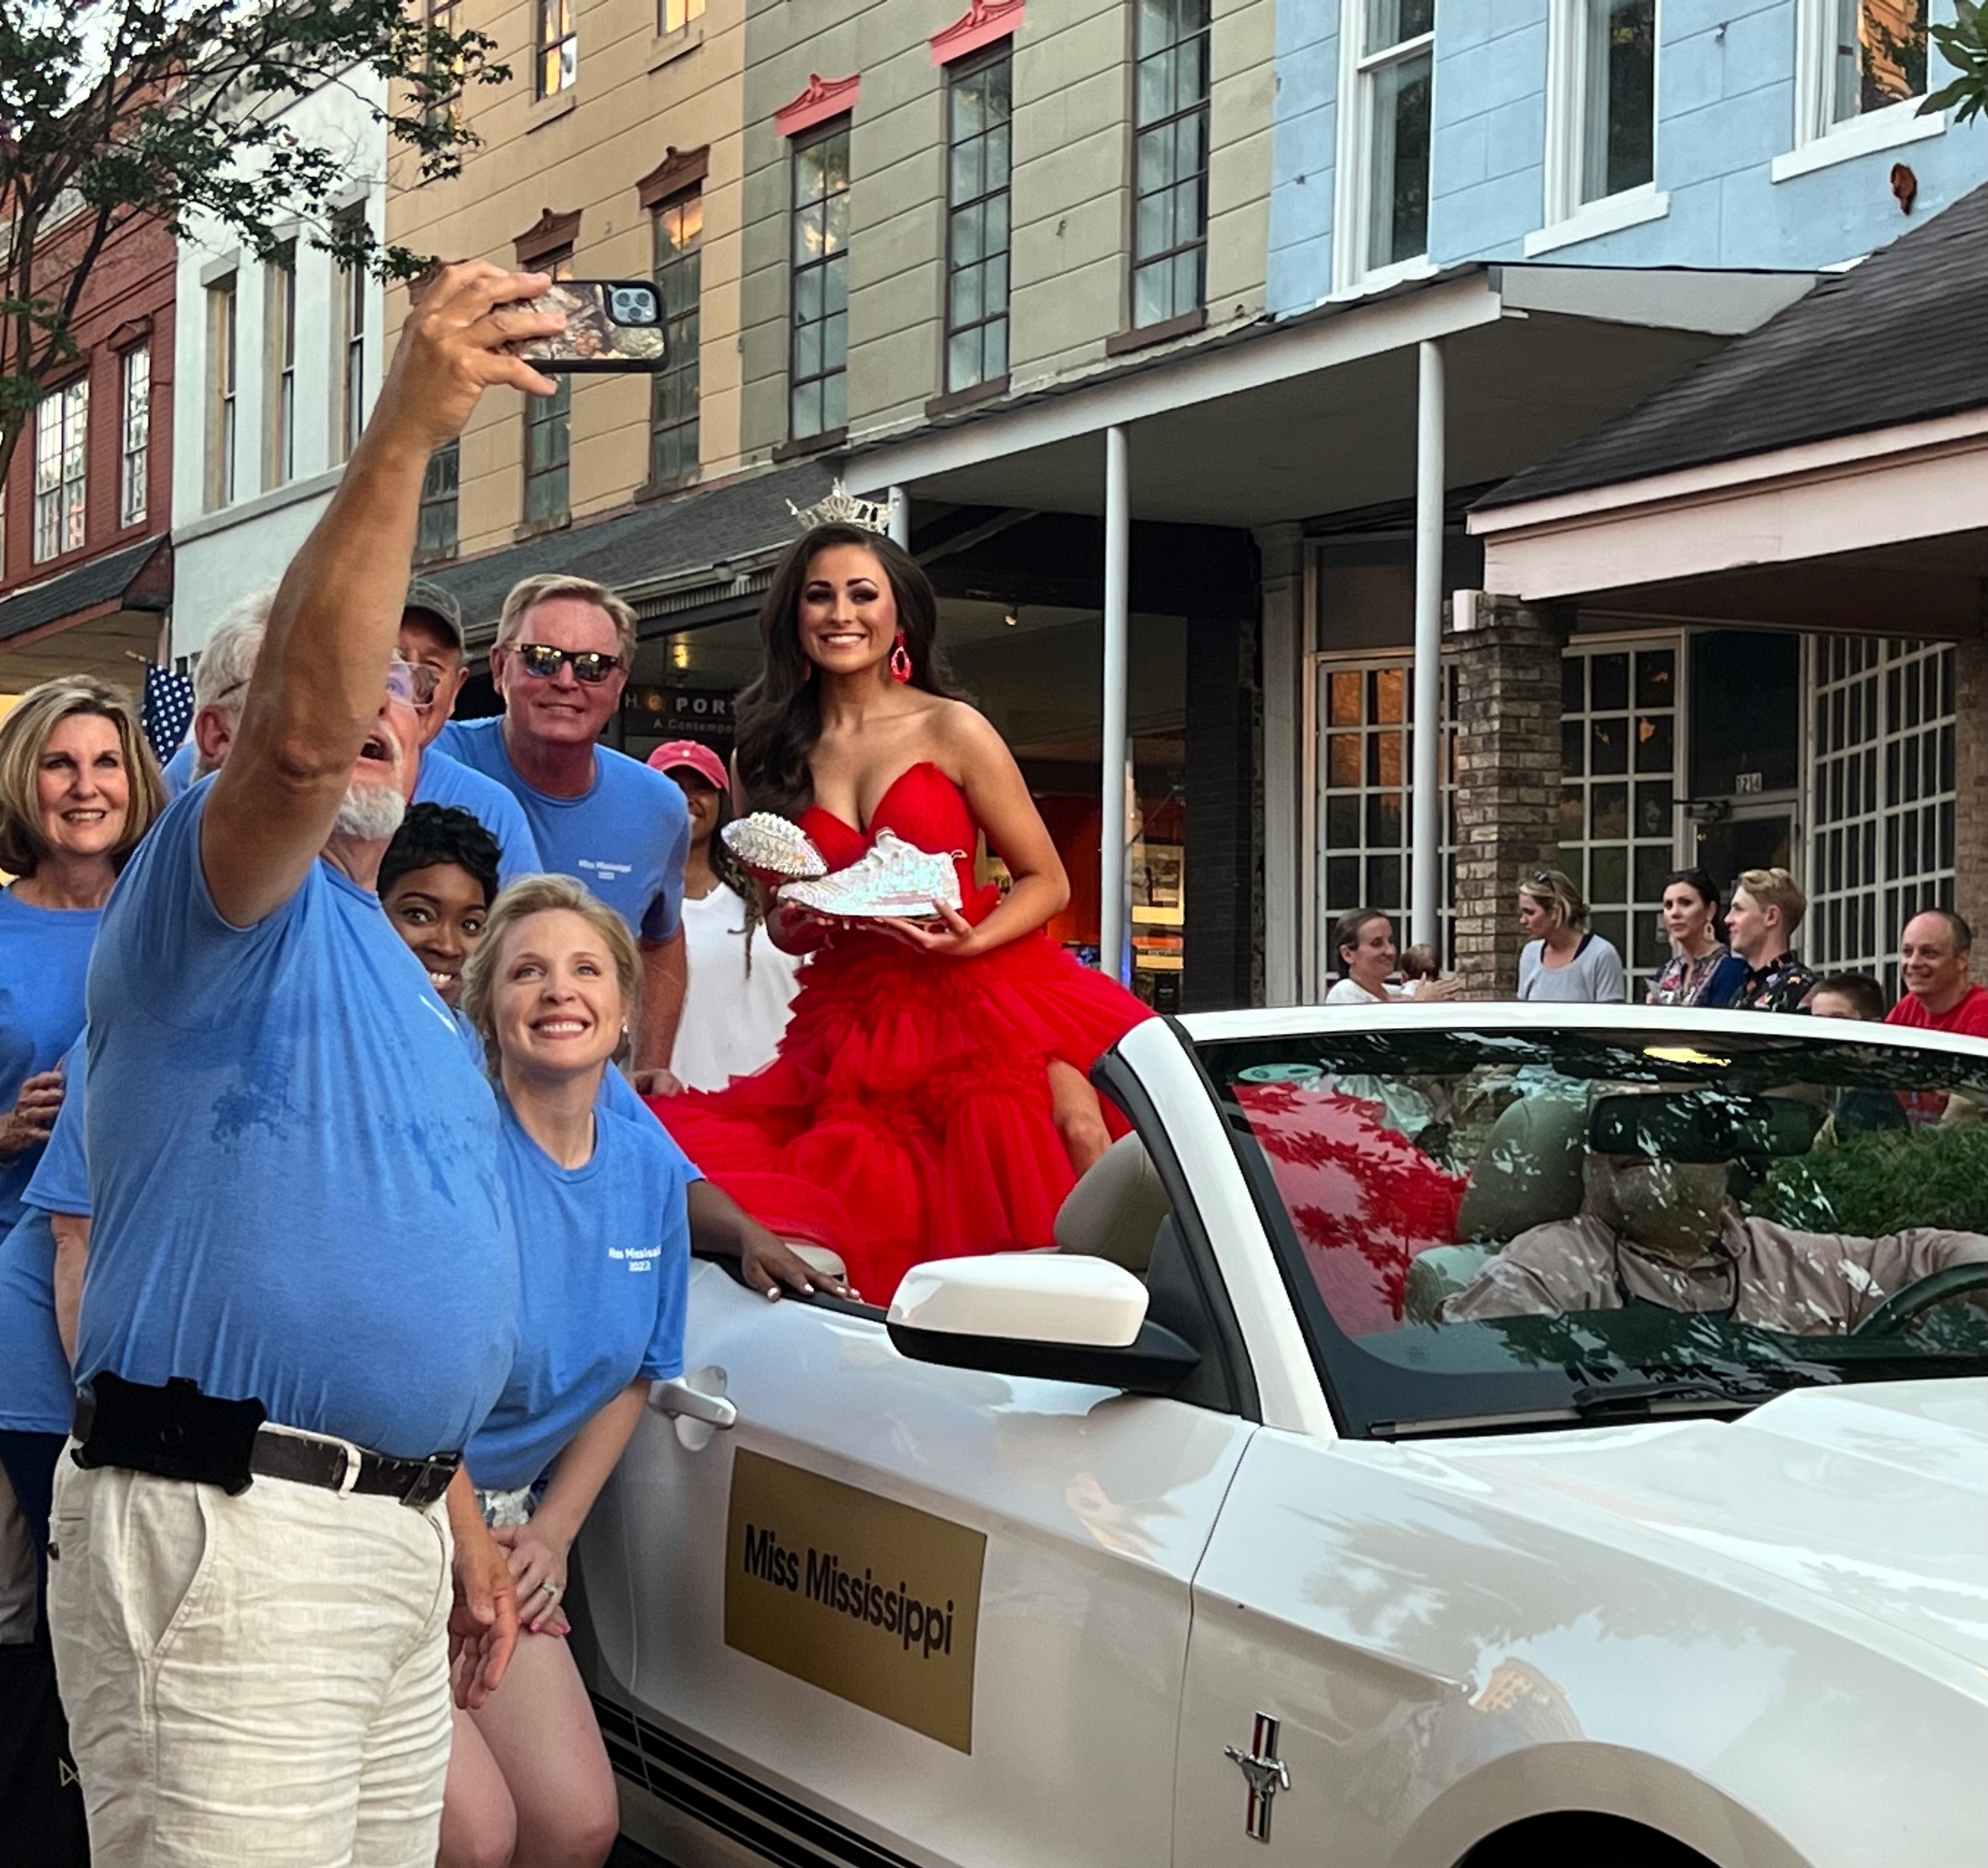 MISS MISSISSIPPI 2022 Washington Street sparkles with candidates on